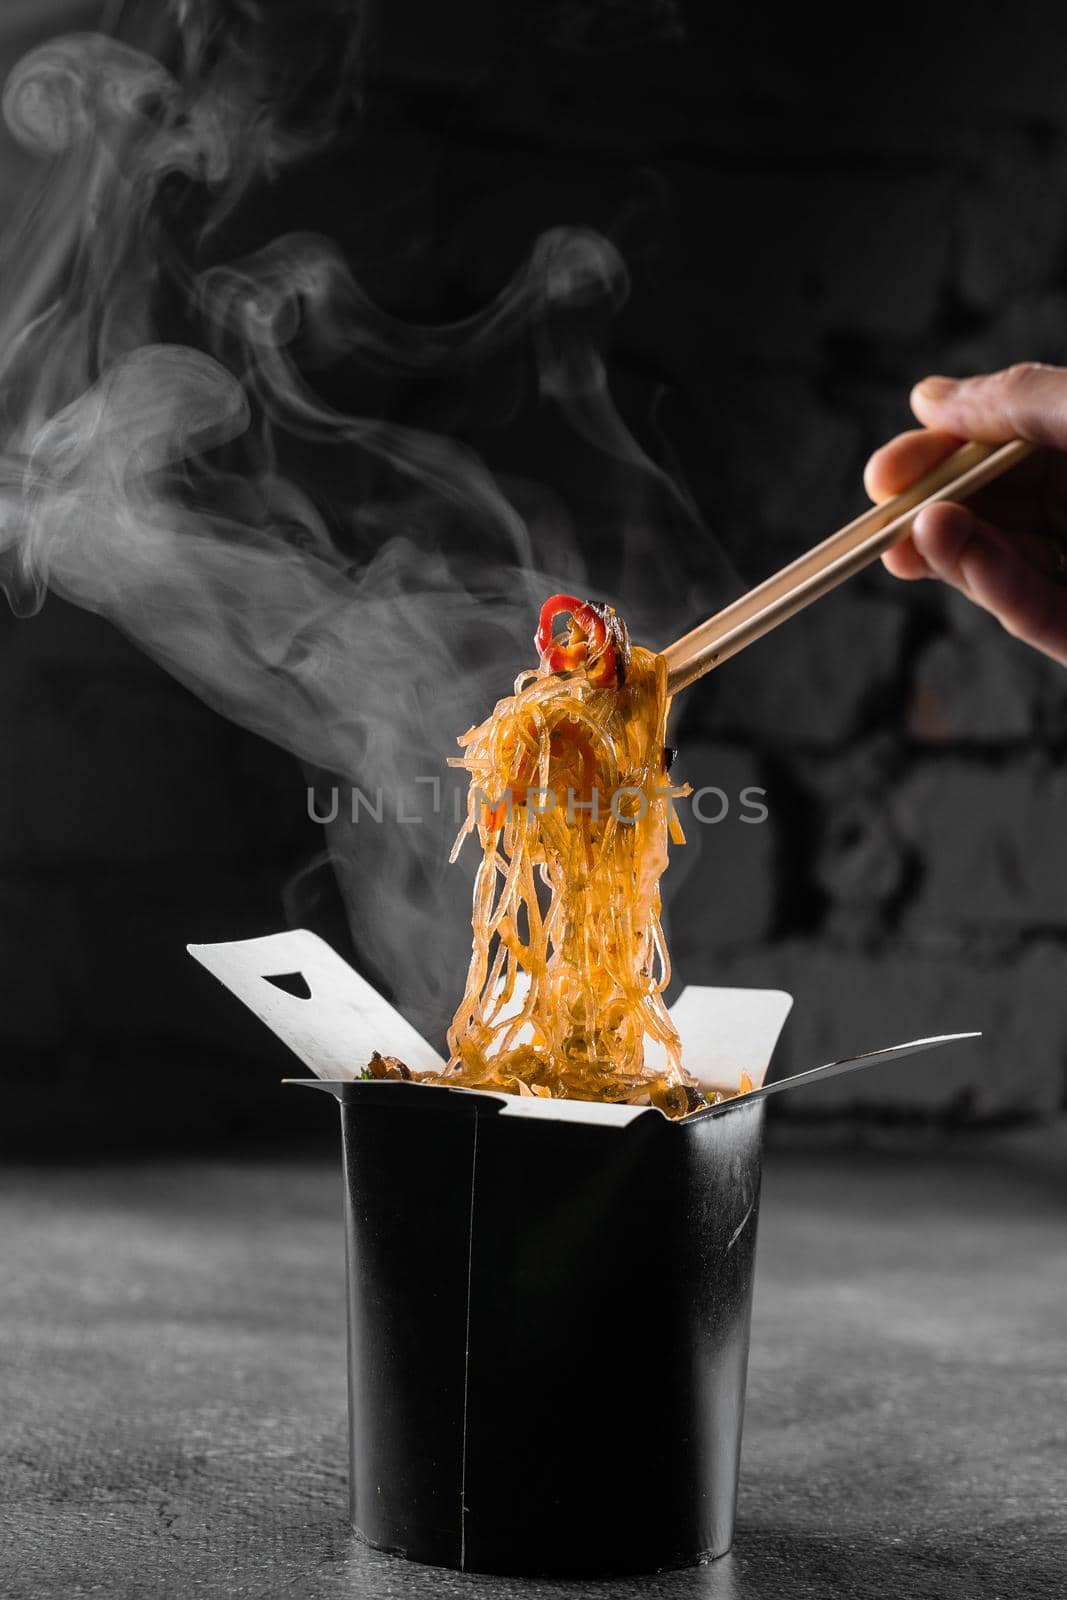 Steaming rice noodles in wok box on black background. Fast food delivery service. Takeaway chinese street meal. Udon in black food container